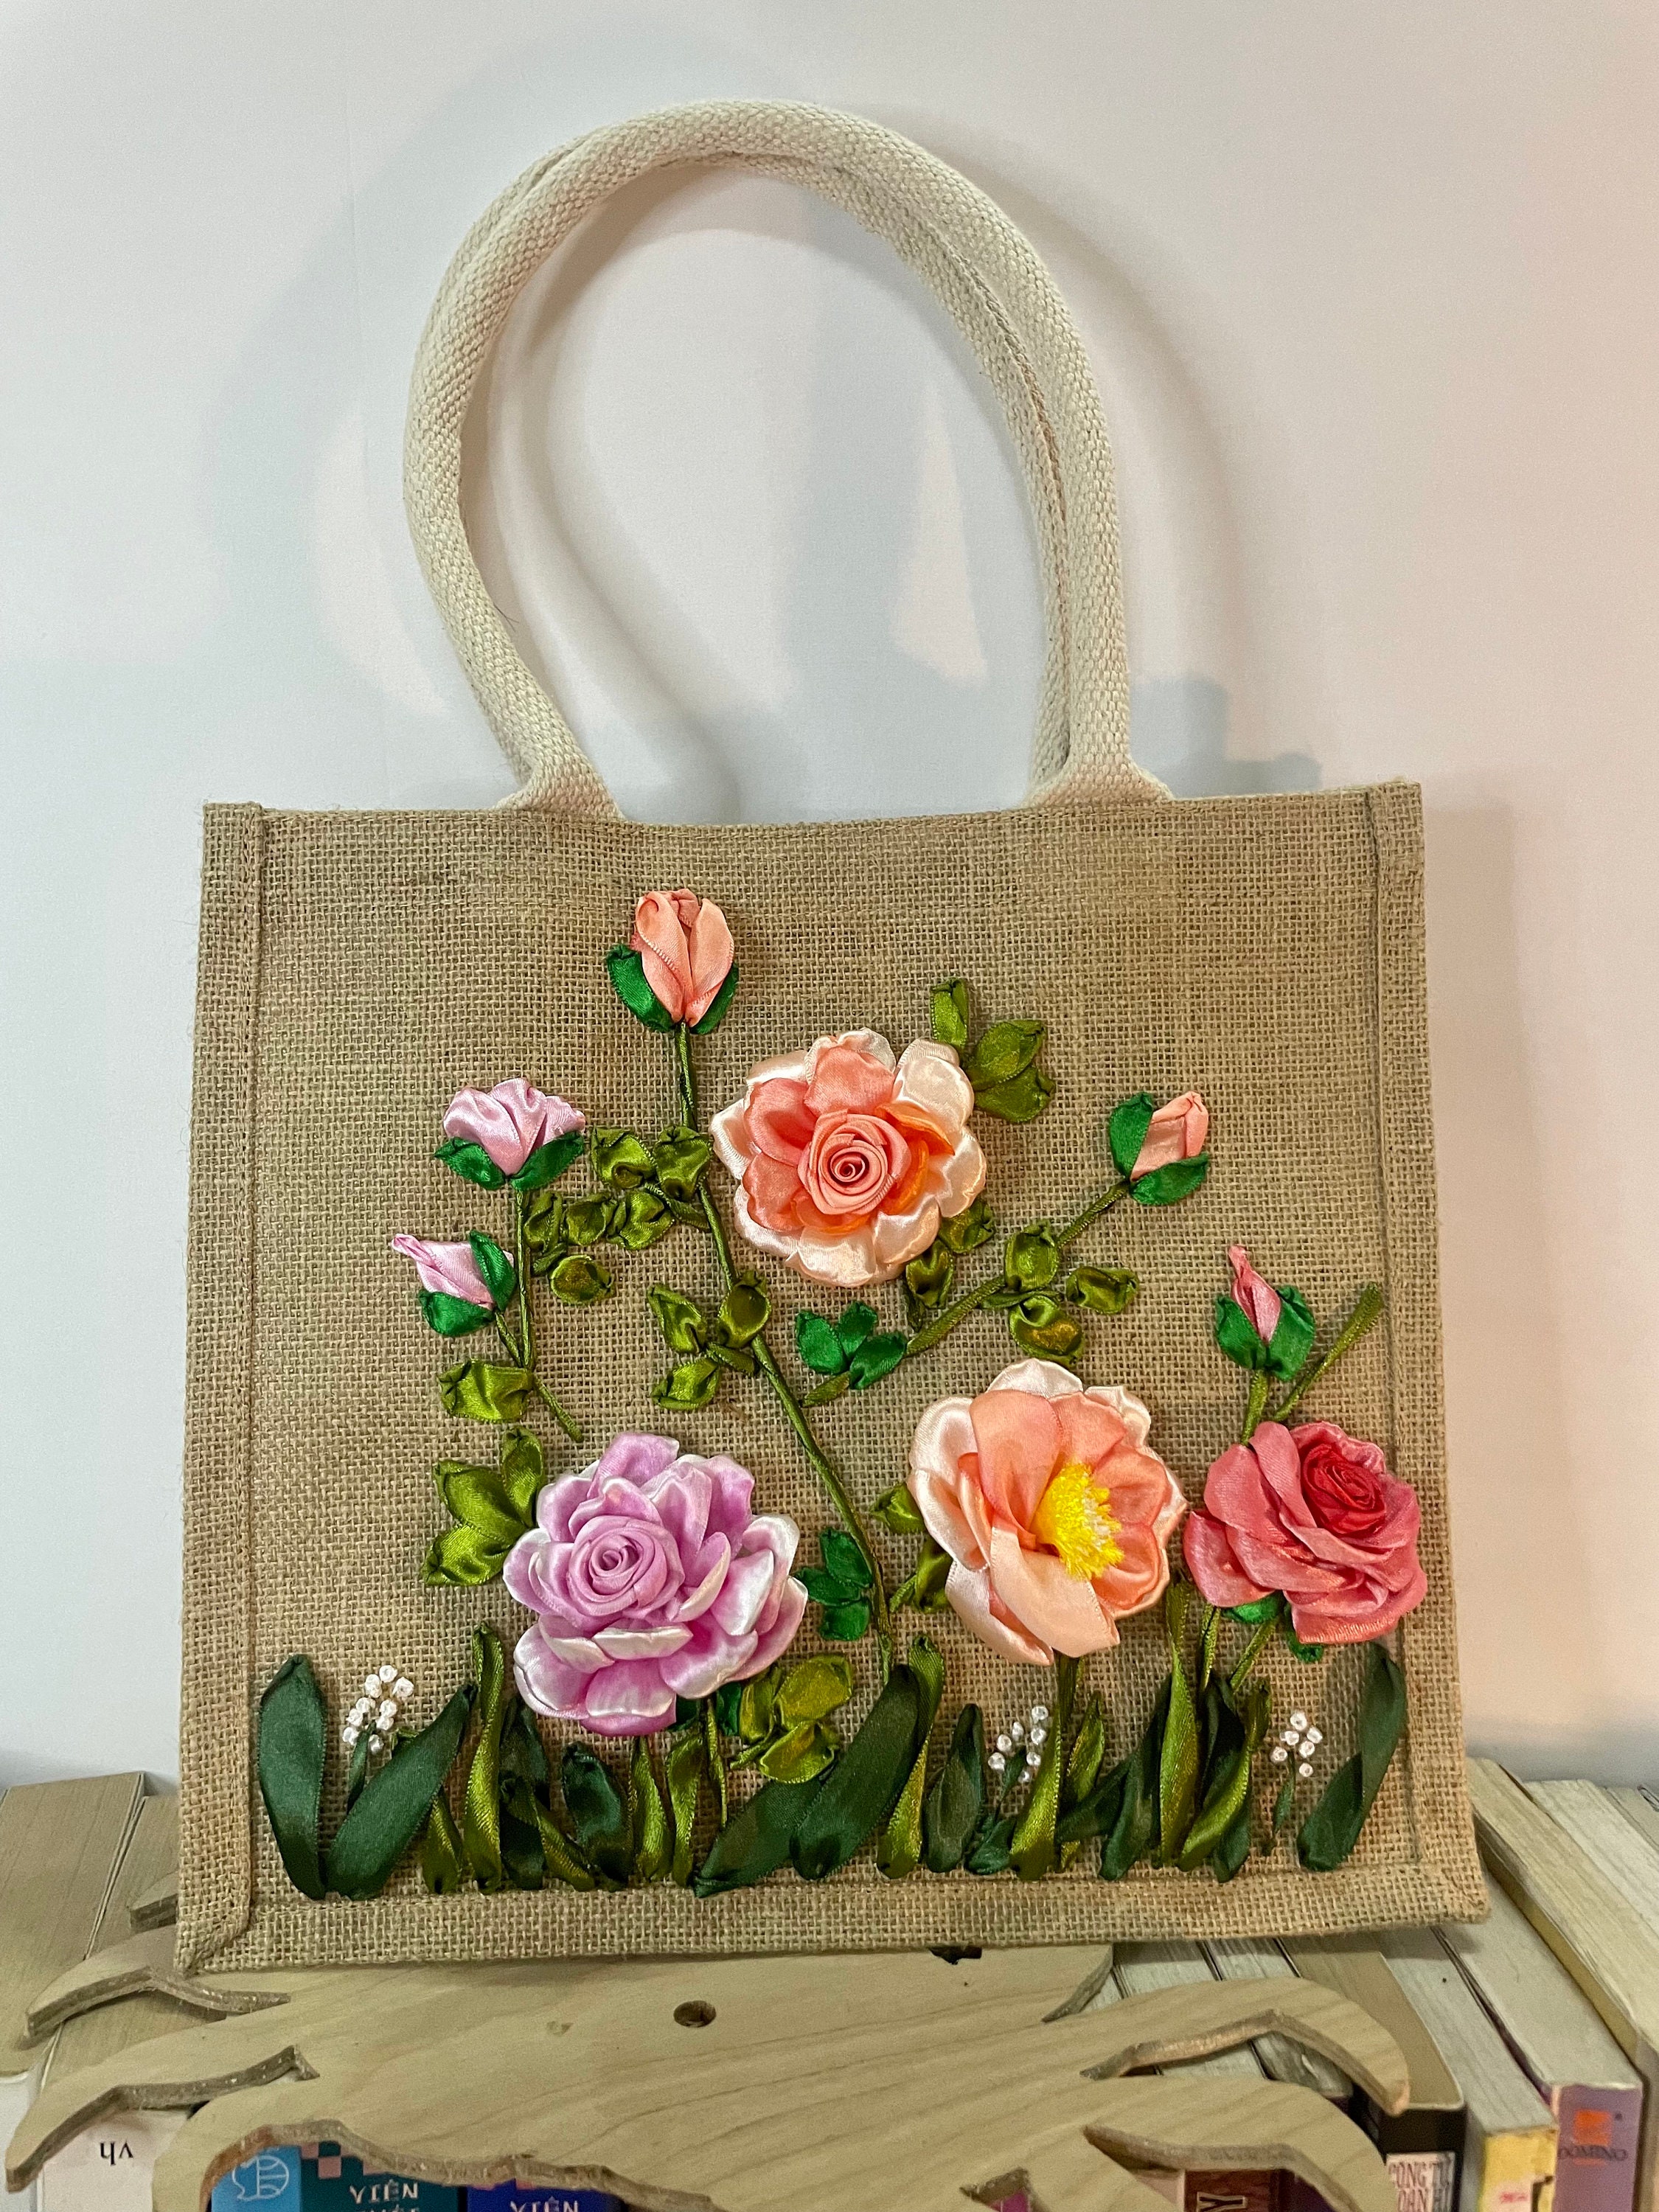 Tingn Initial Jute Tote Bag for Women Handmade Embroidery Personalized Monogrammed Tote Bag with Strap Gifts for Mothers Day Birthday Gifts for Mom